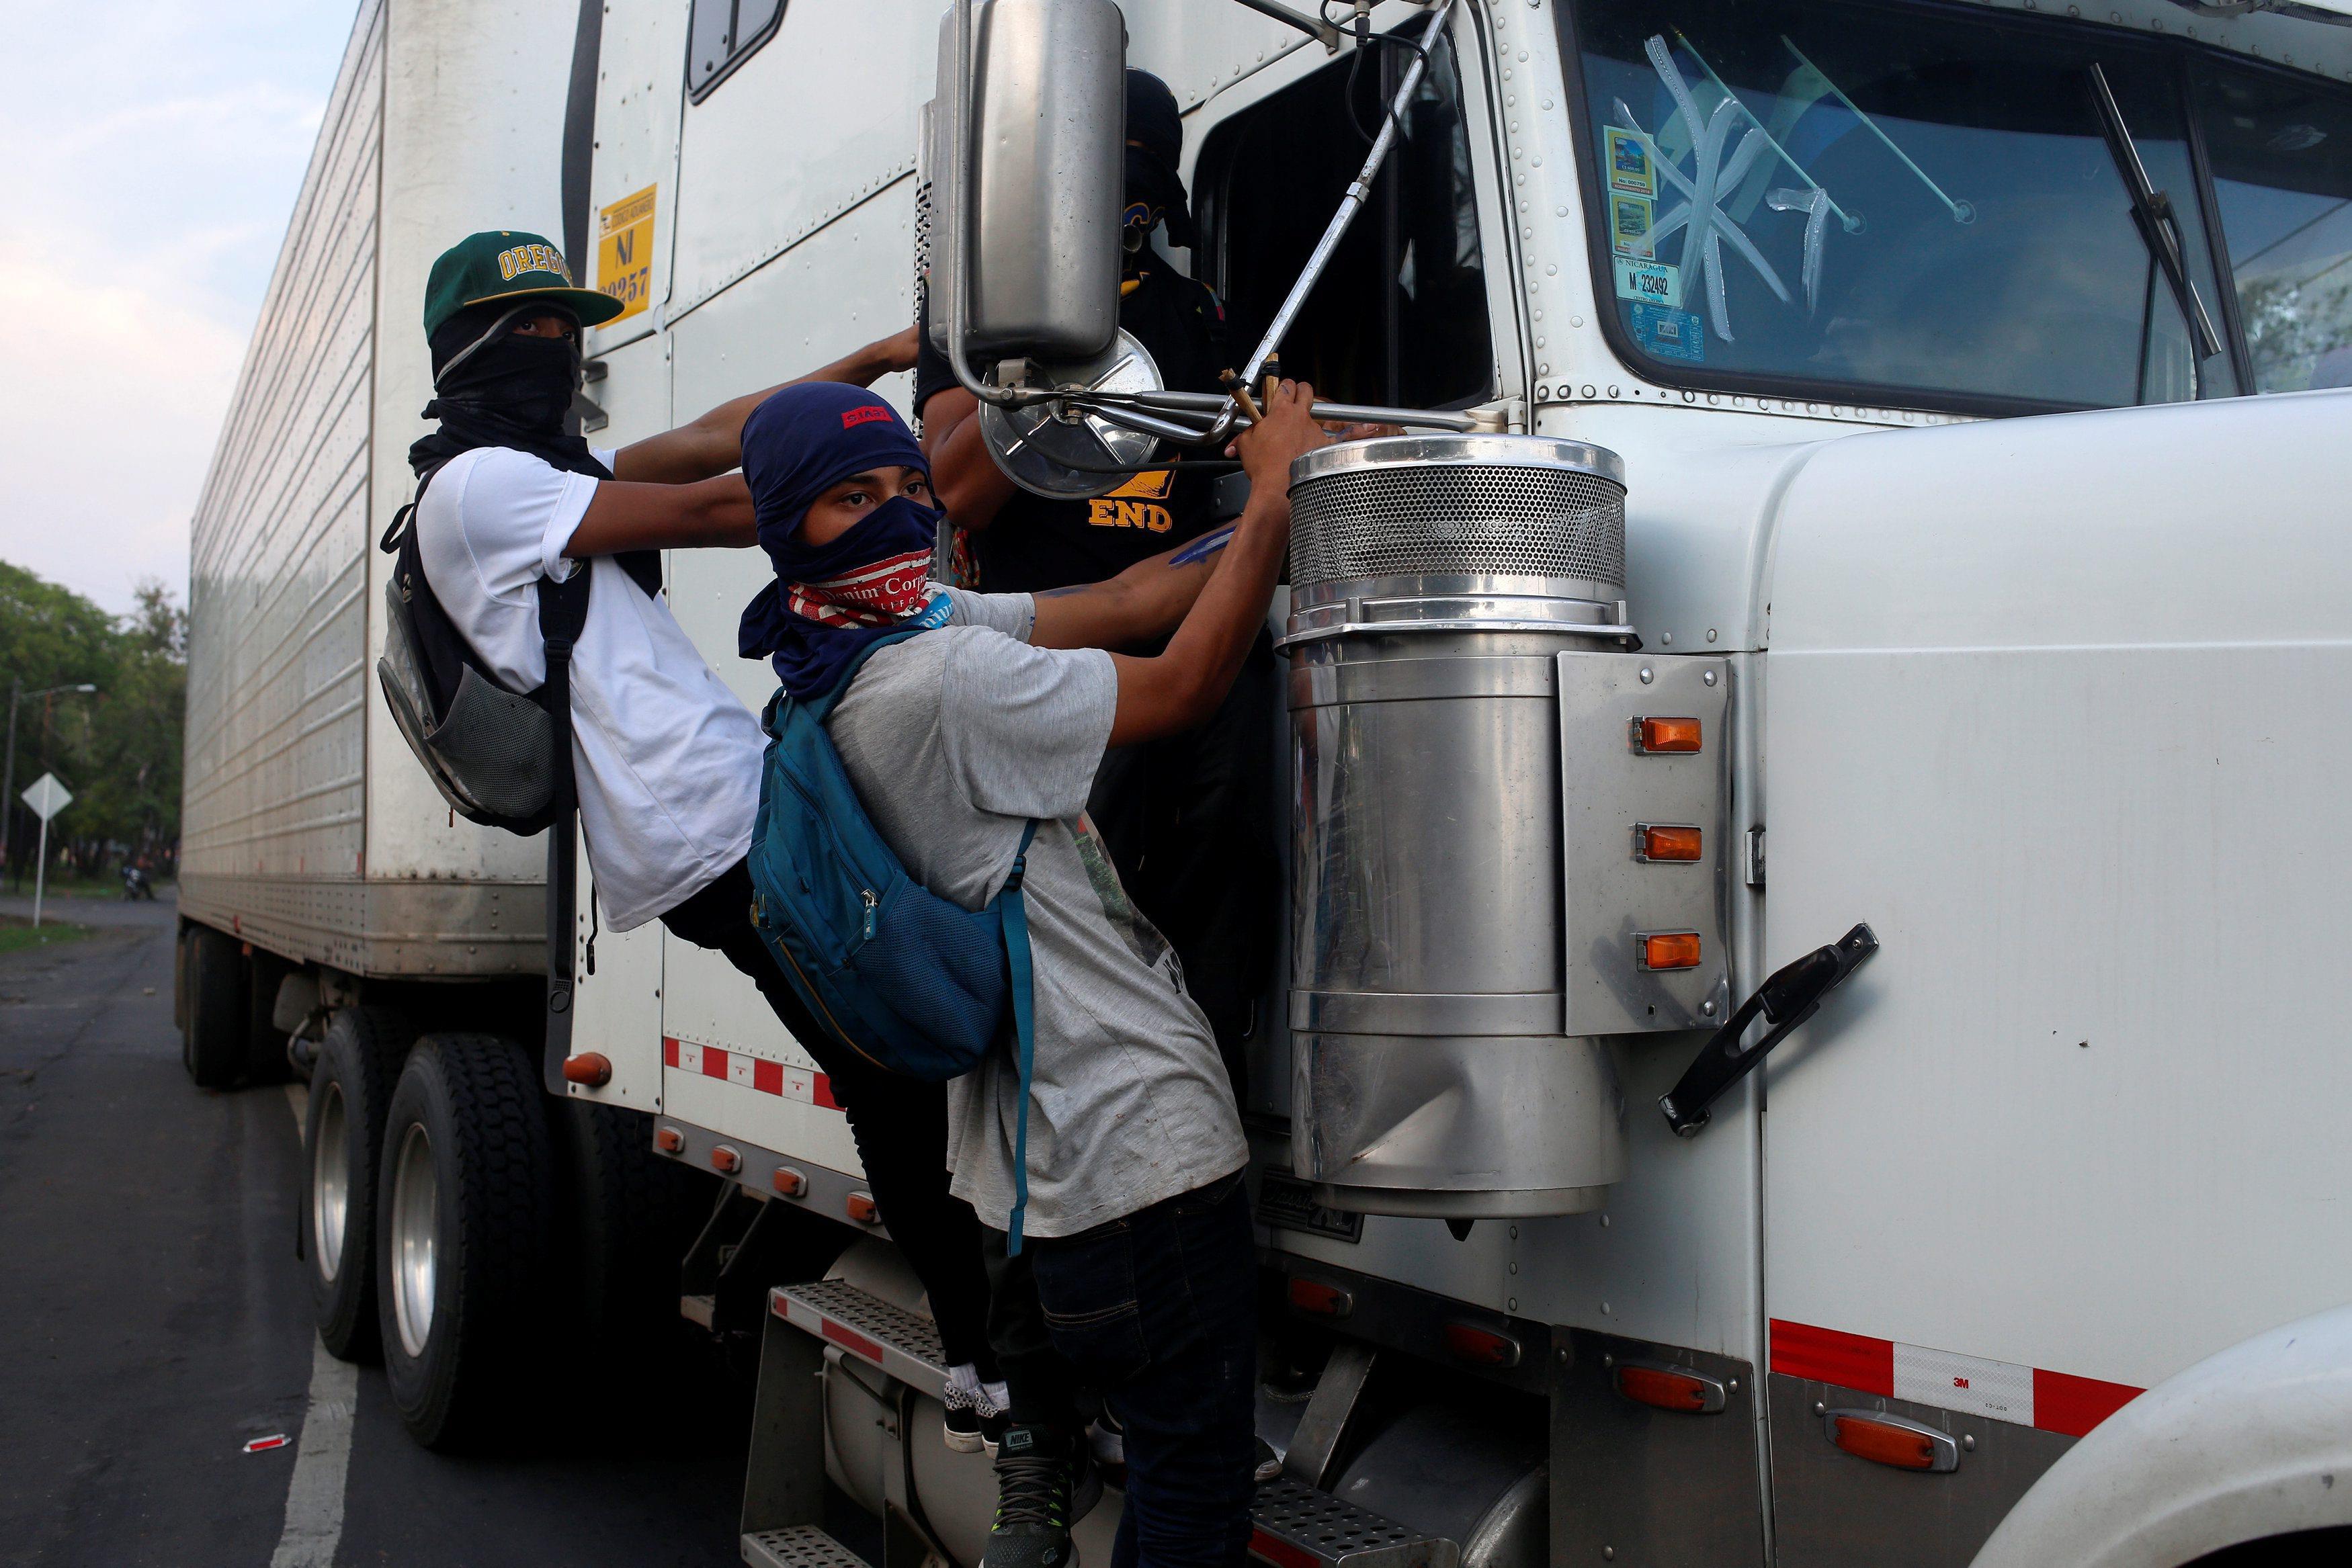 Protesters hang from the side of a truck during a protest against President Daniel Ortega's governme